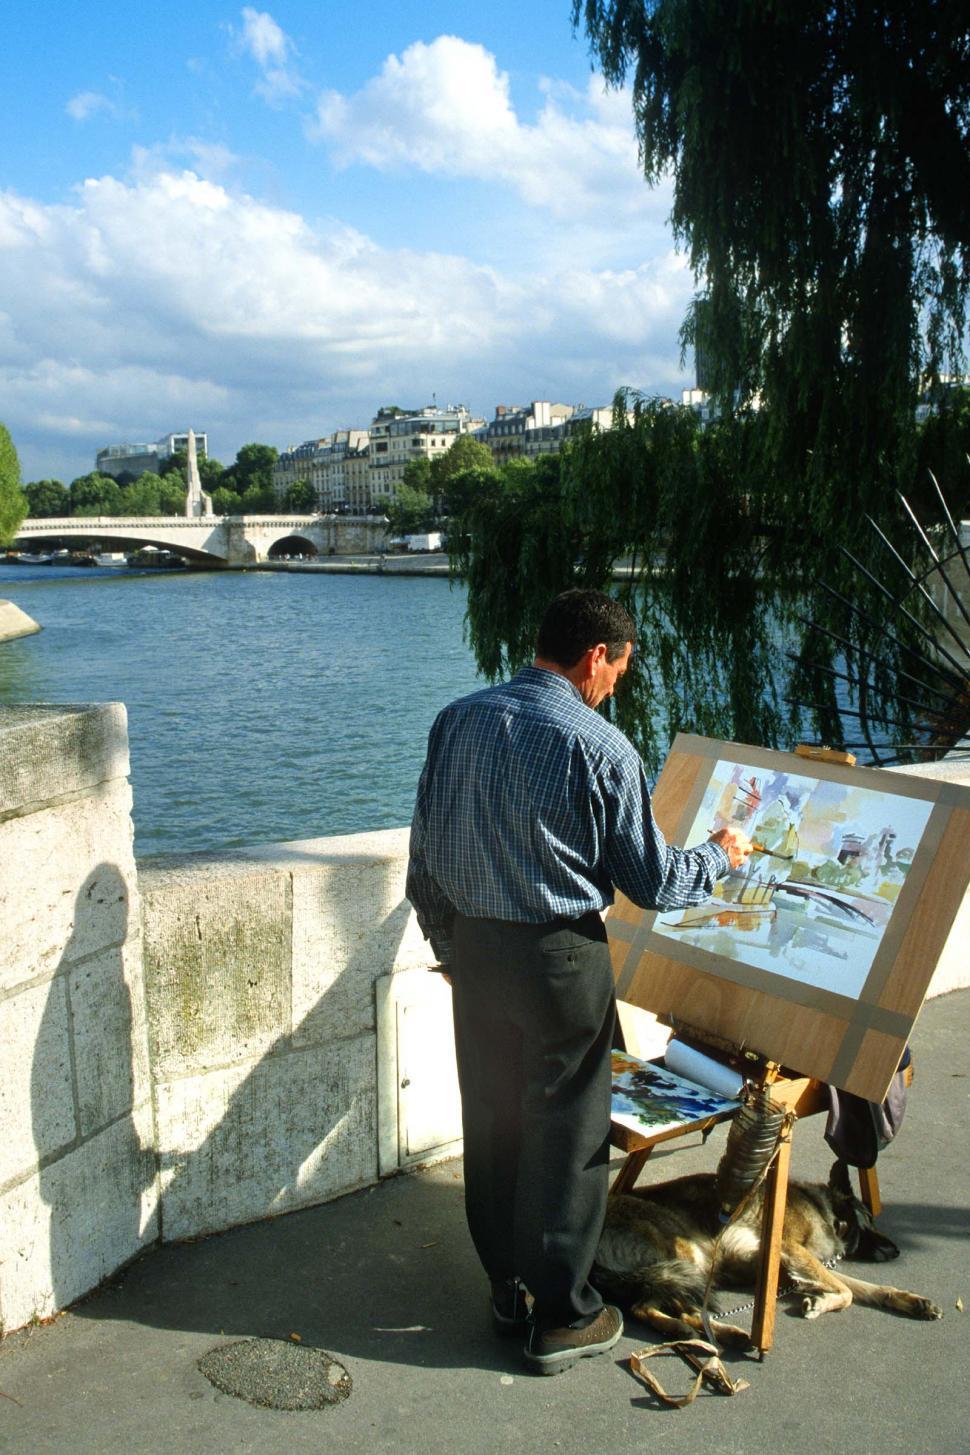 Free Image of Man Standing by River Holding Painting 